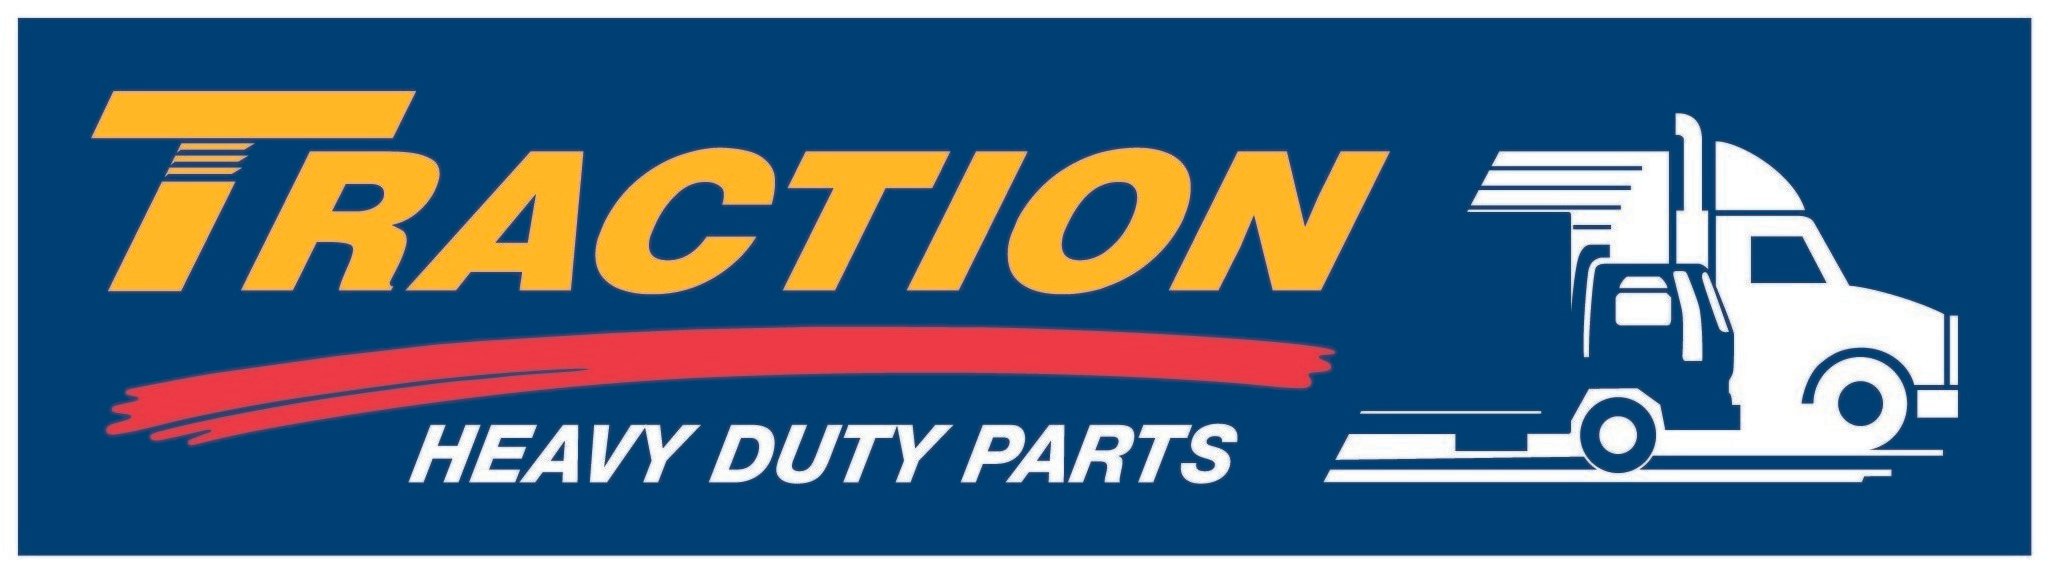 High Res TRACTION Logo.jpg